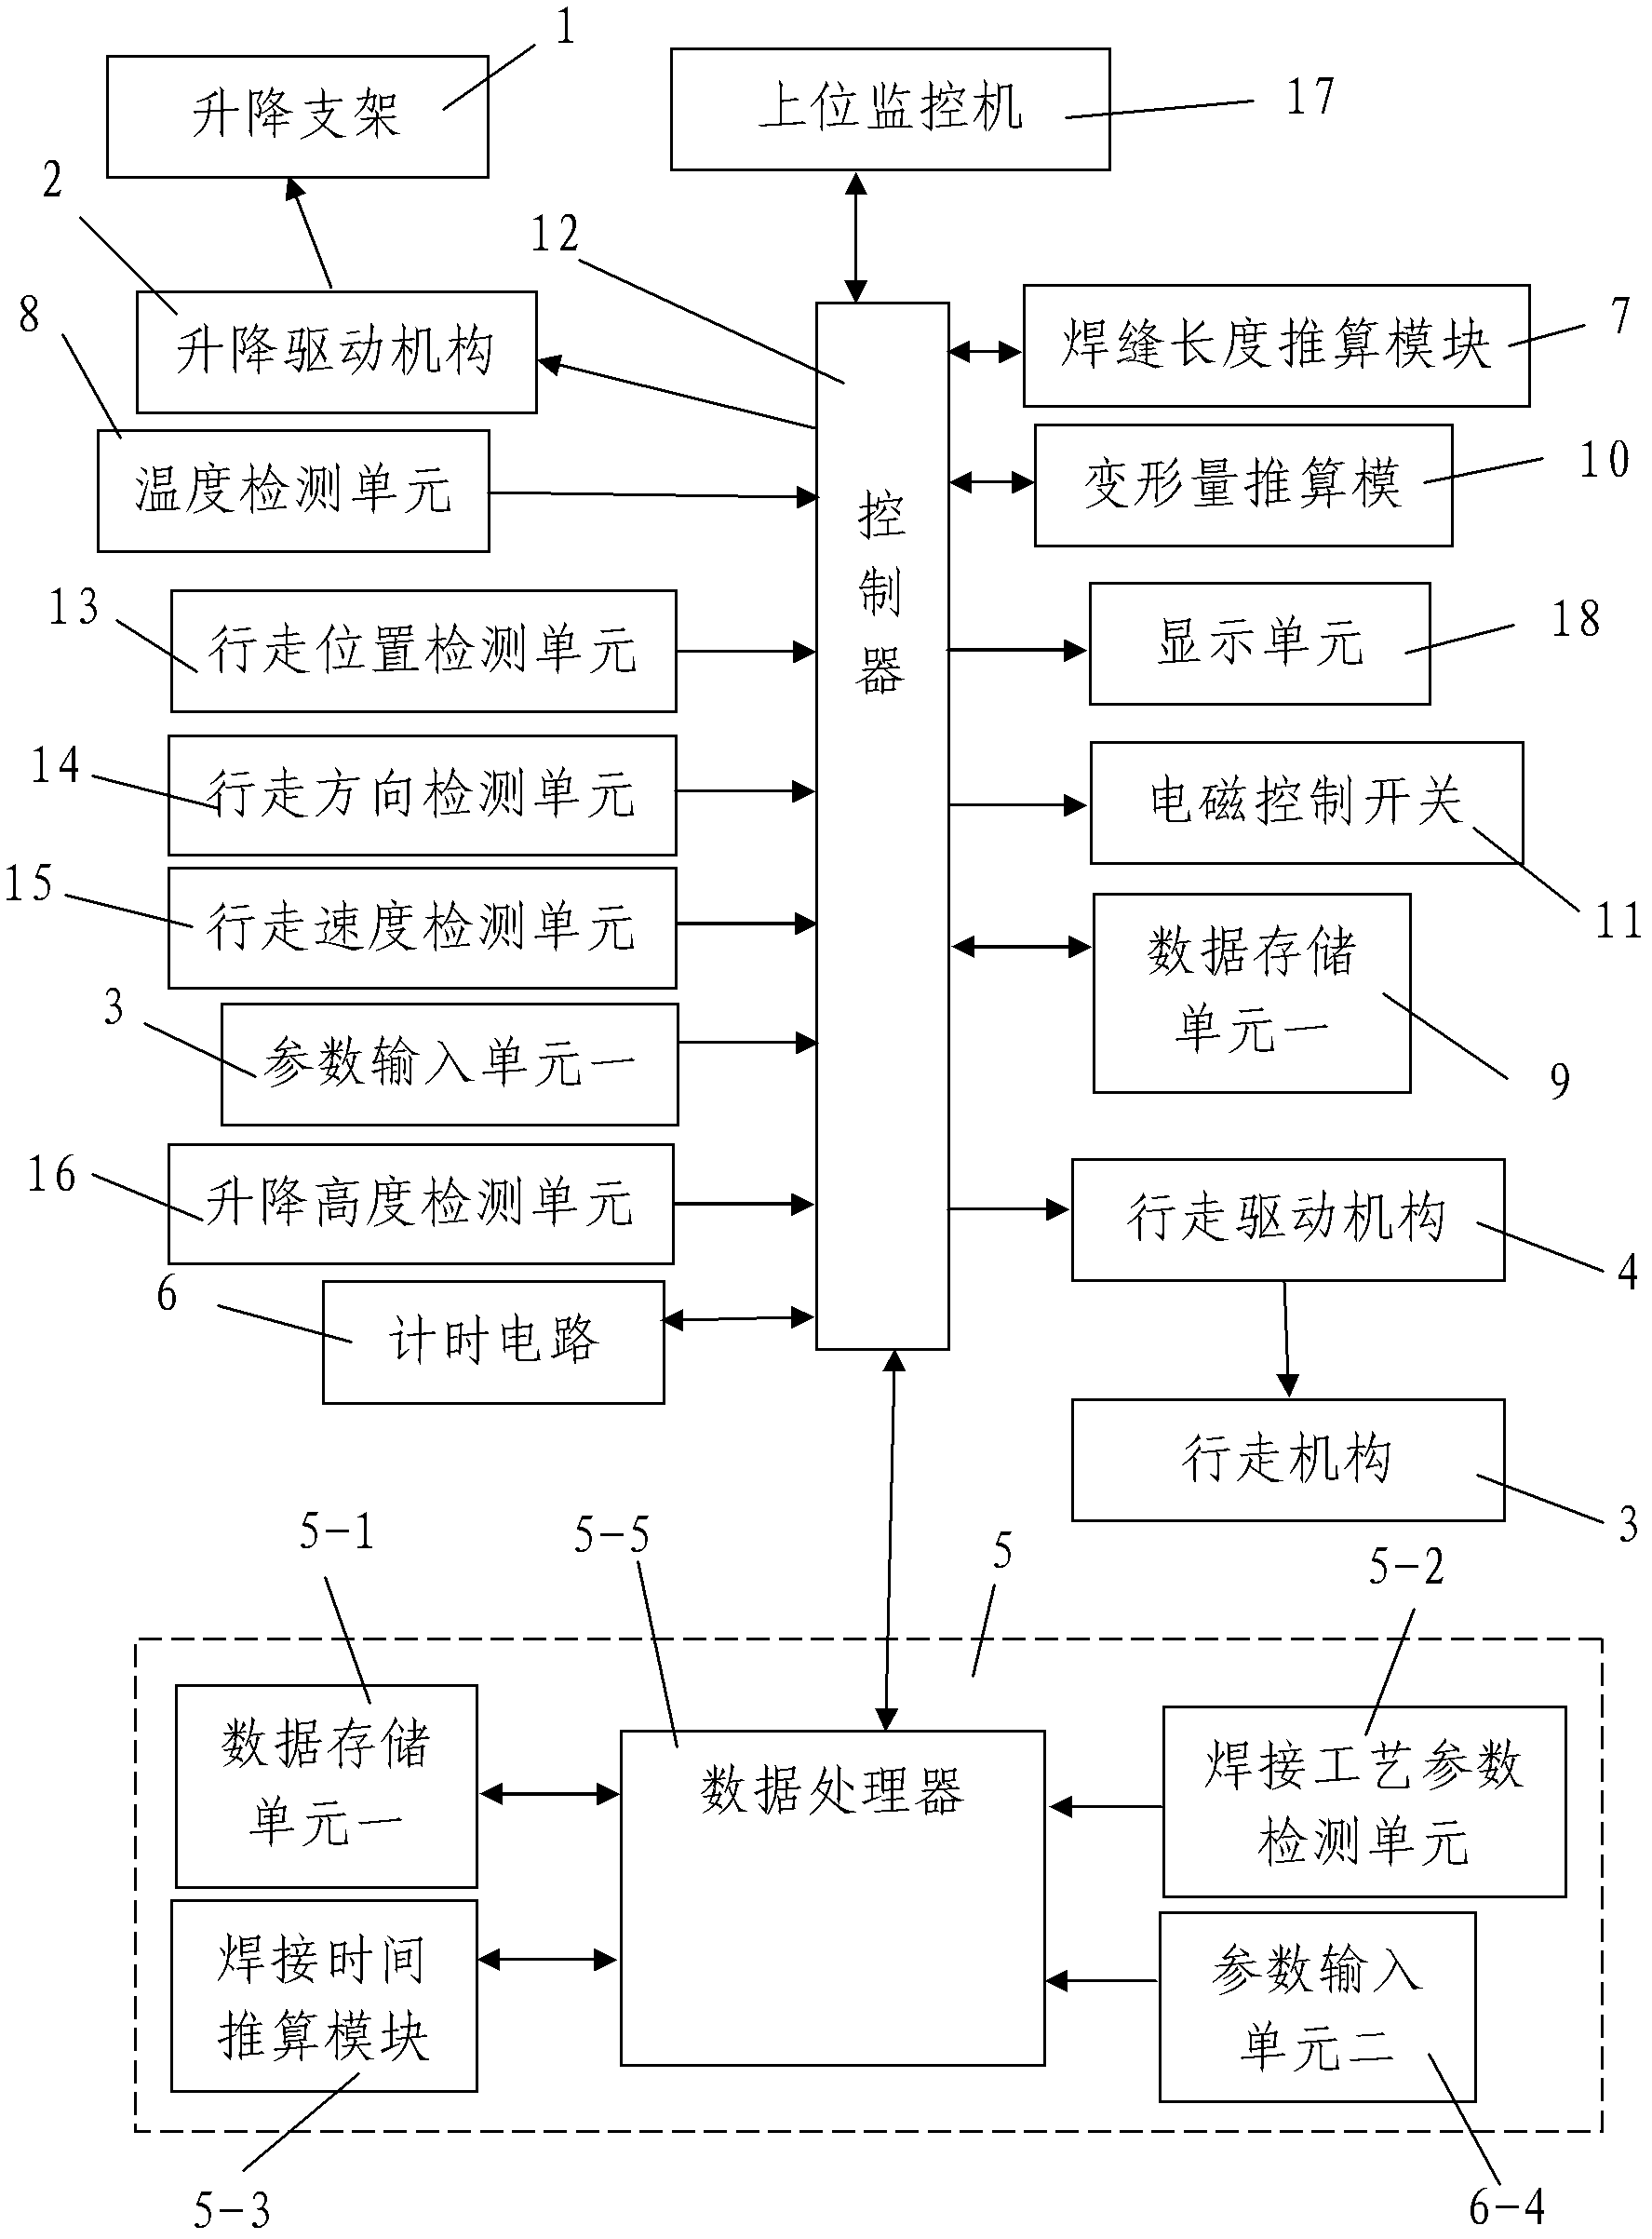 Multiple-parameter monitoring system used for electric welding machine